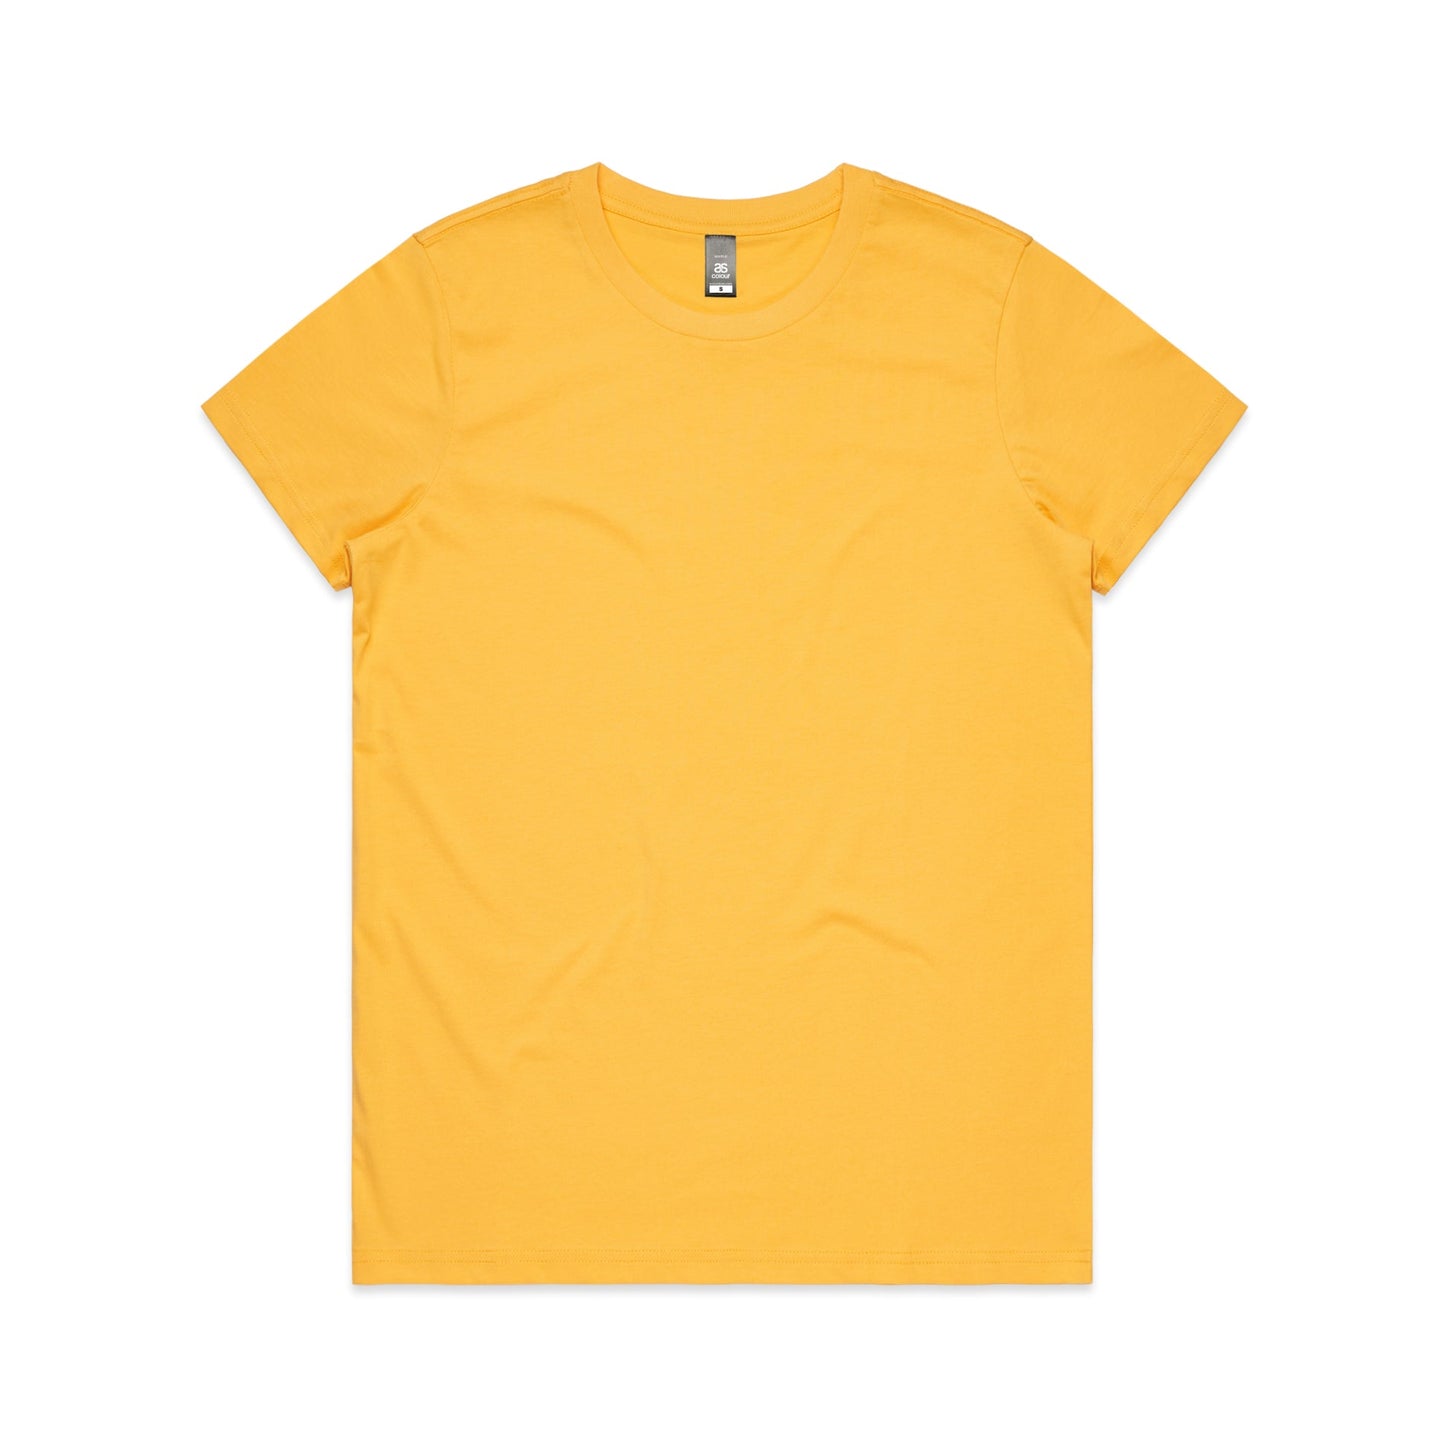 How You Doin? Relaxed Maple T-Shirt